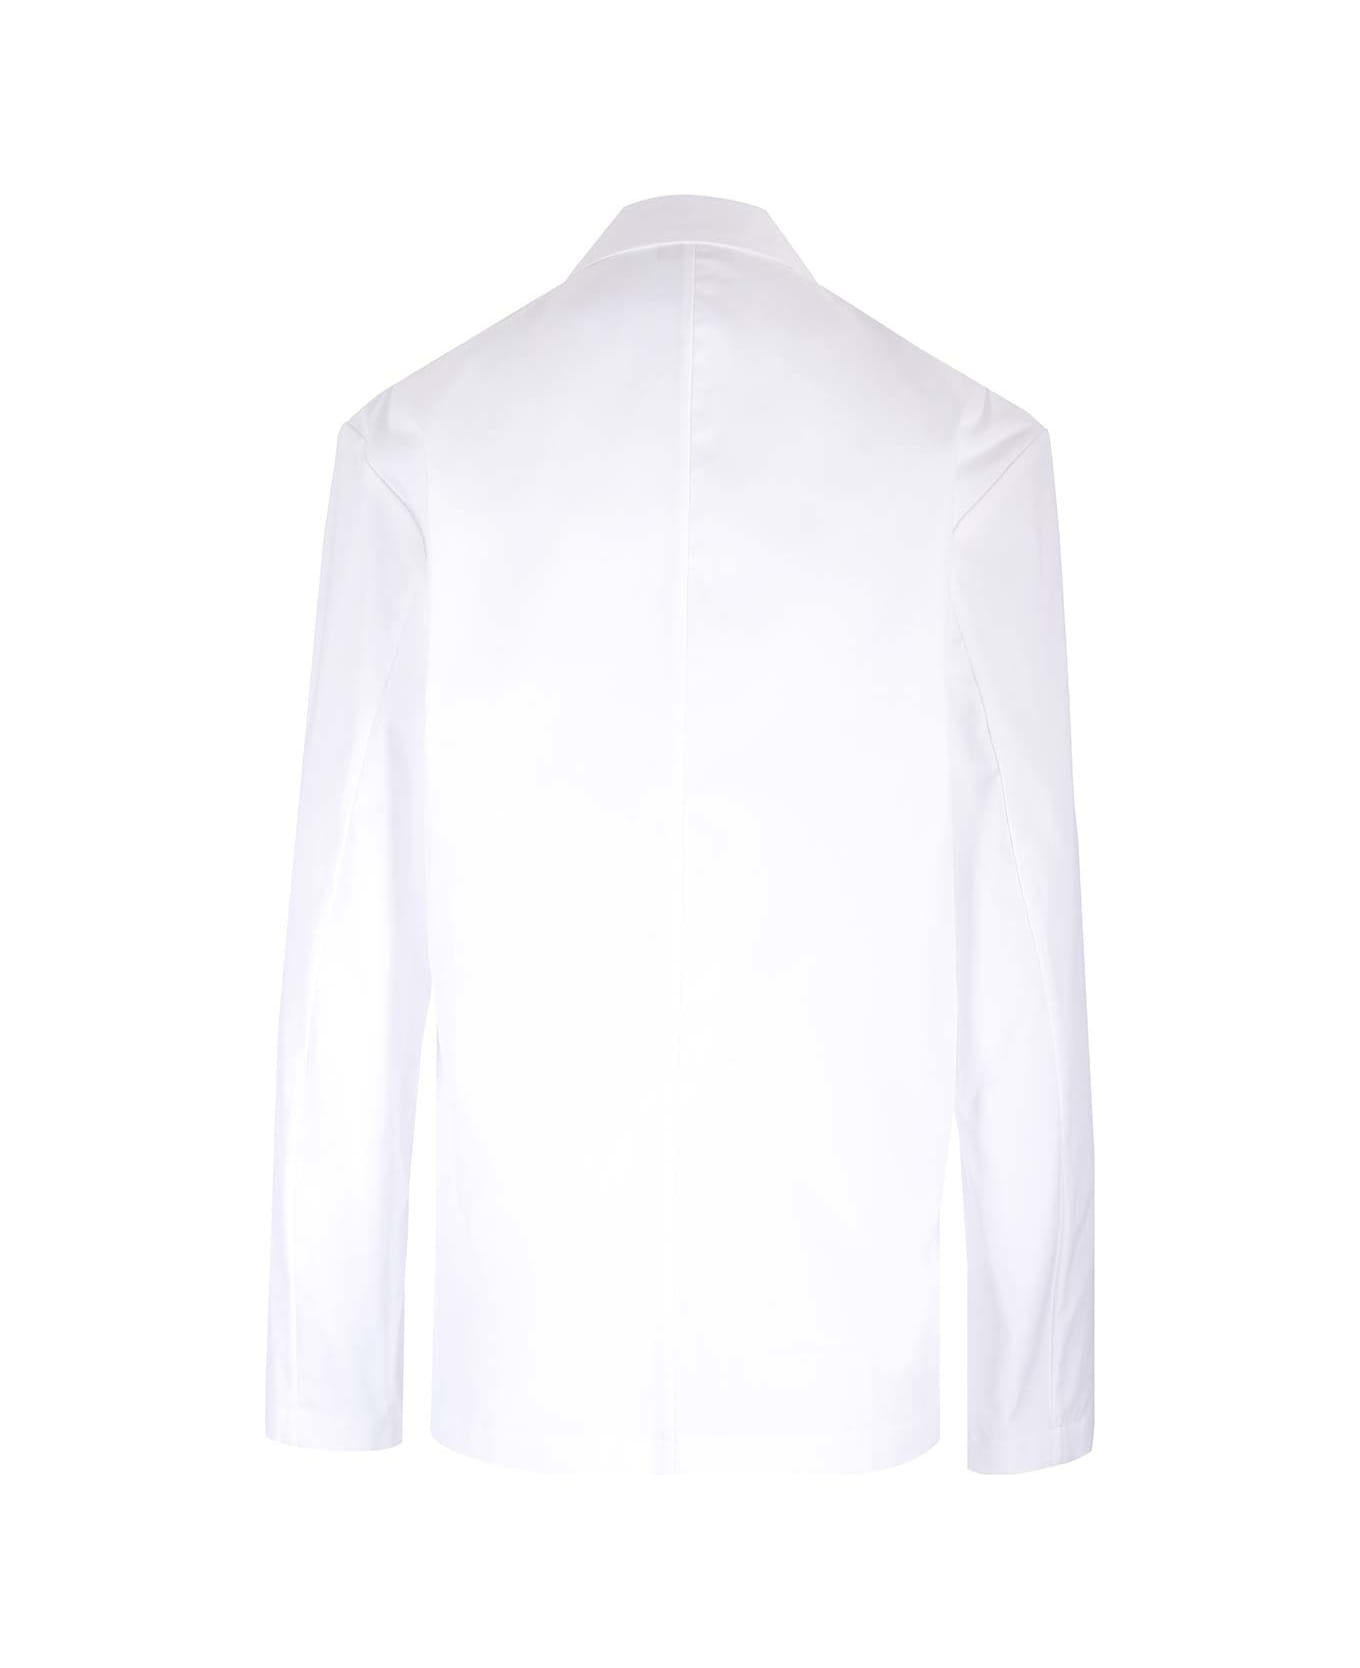 Dries Van Noten Relaxed Fit Unlined Blazer - White